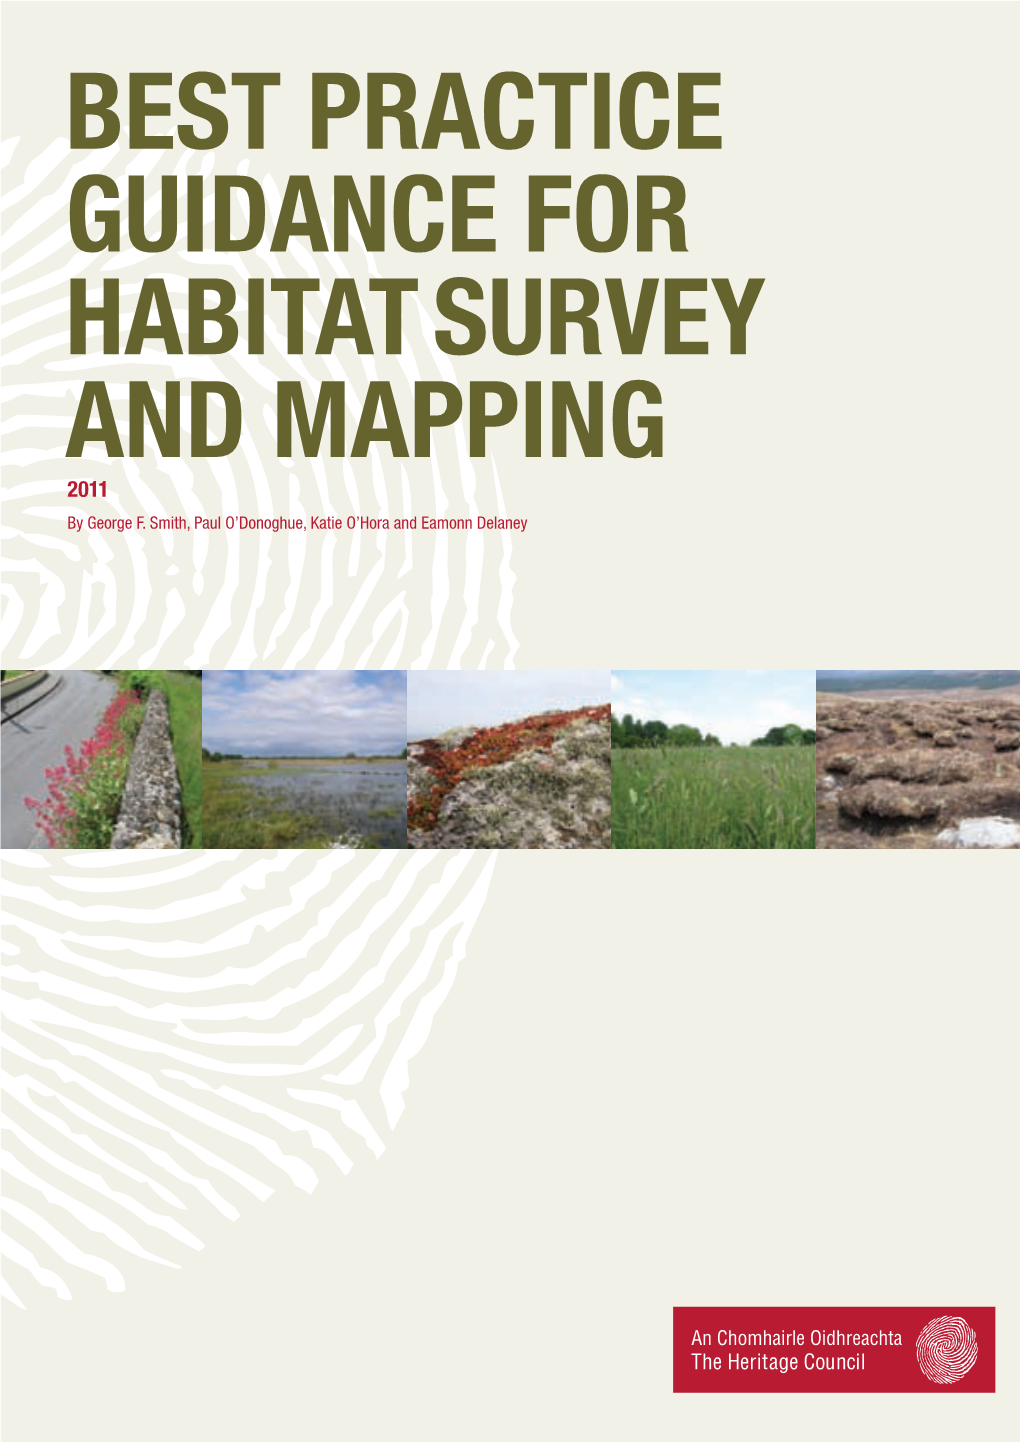 BEST PRACTICE GUIDANCE for HABITAT SURVEY and MAPPING 2011 by George F